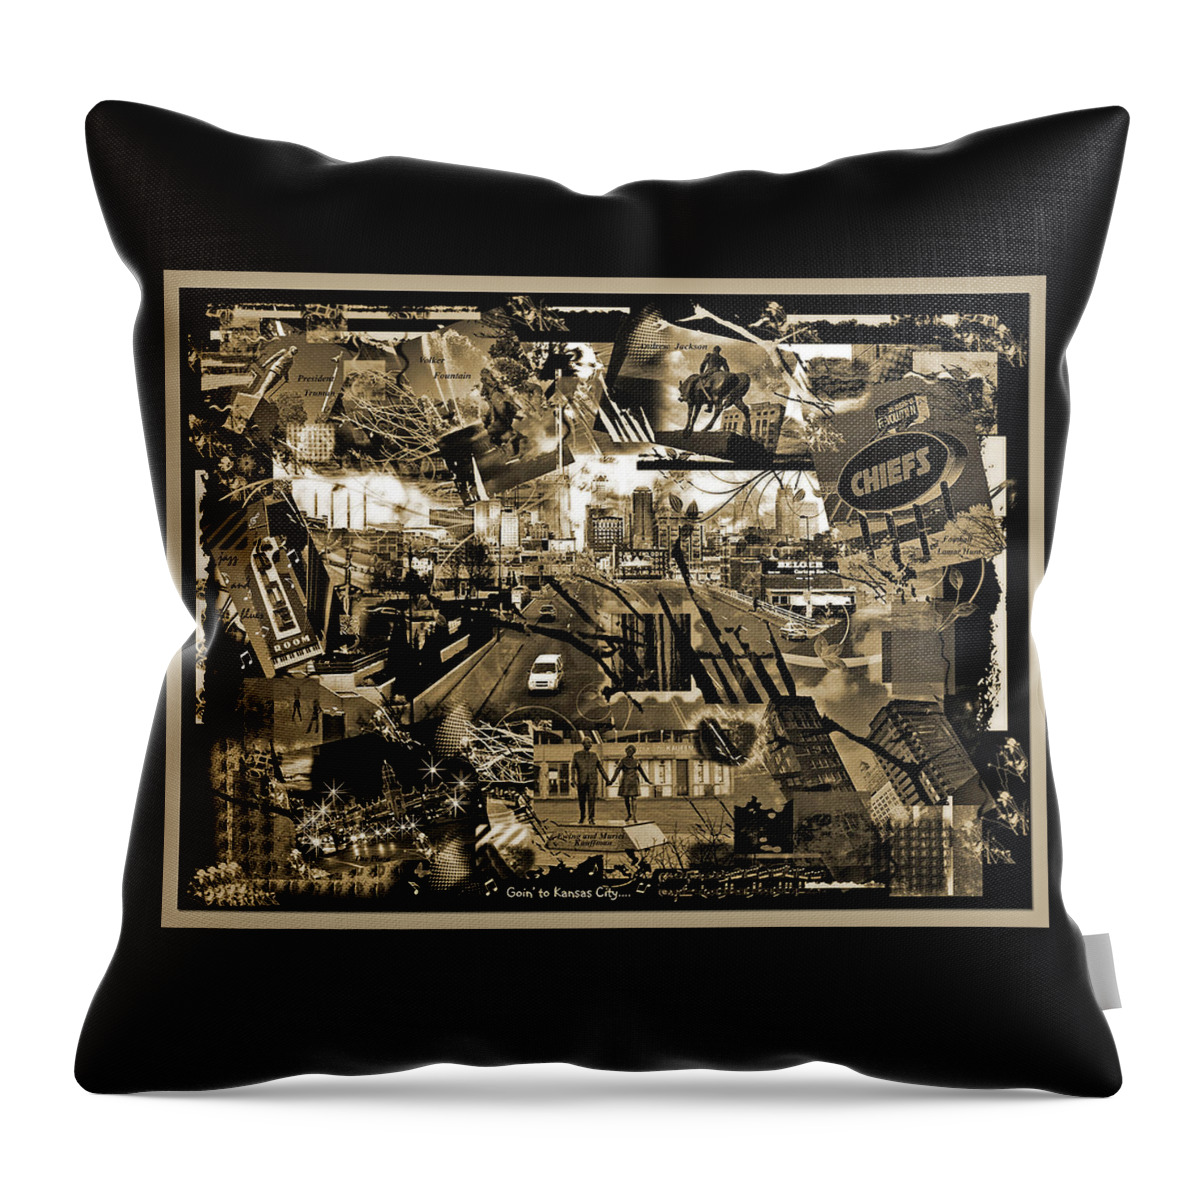 Collage Throw Pillow featuring the photograph Goin' to Kansas City - Grunge Collage by Ellen Tully